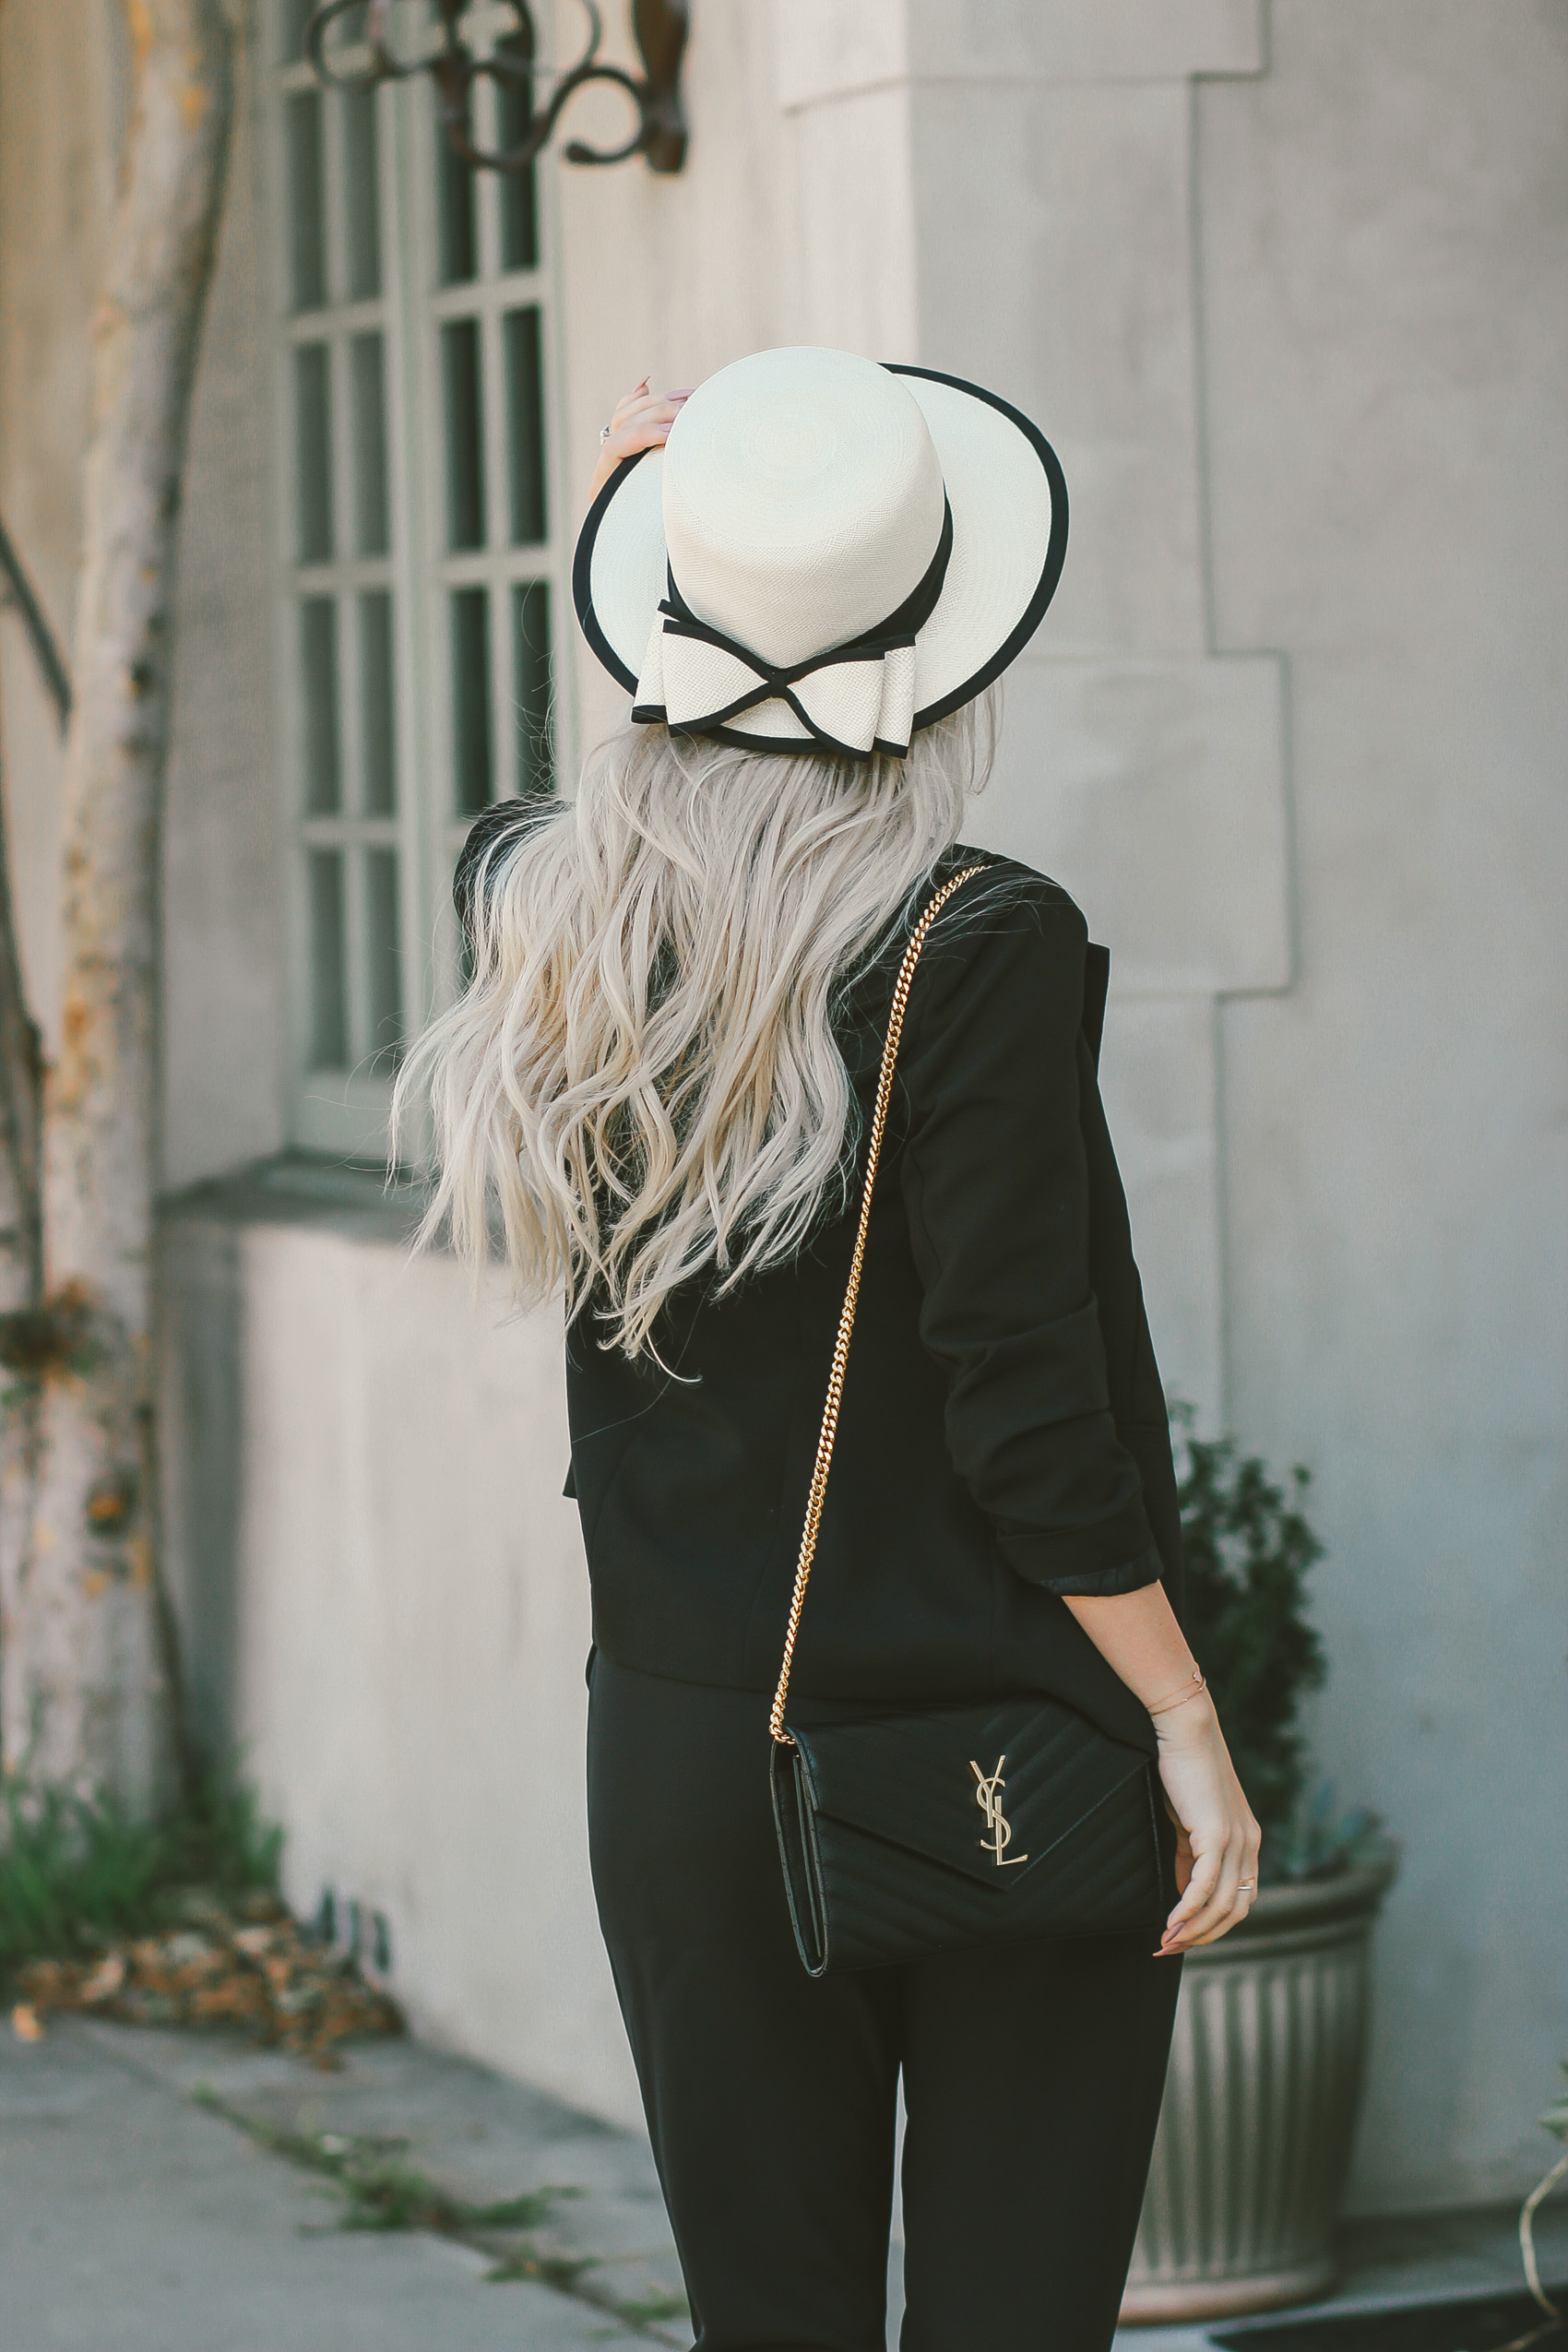 Panama Hat @galponco | All Black with Nude Louboutin's | Black YSL Bag | Blondie in the City by Hayley Larue